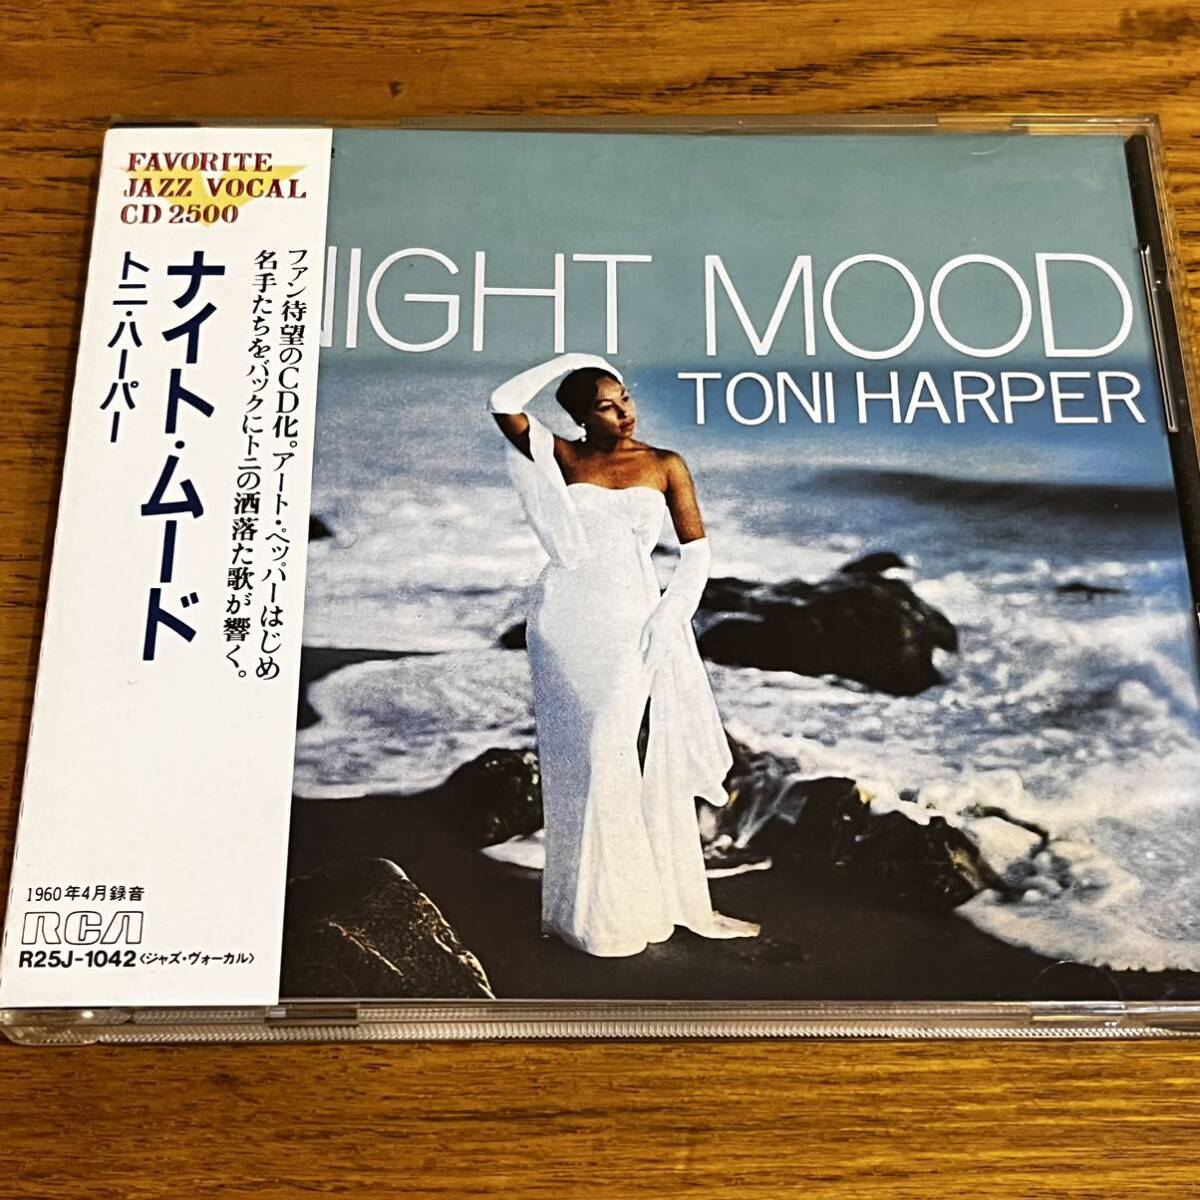 CD with belt toni* is -pa-TONI HARPER NIGHT MOOD Japanese explanation equipped disk excellent 89 year 